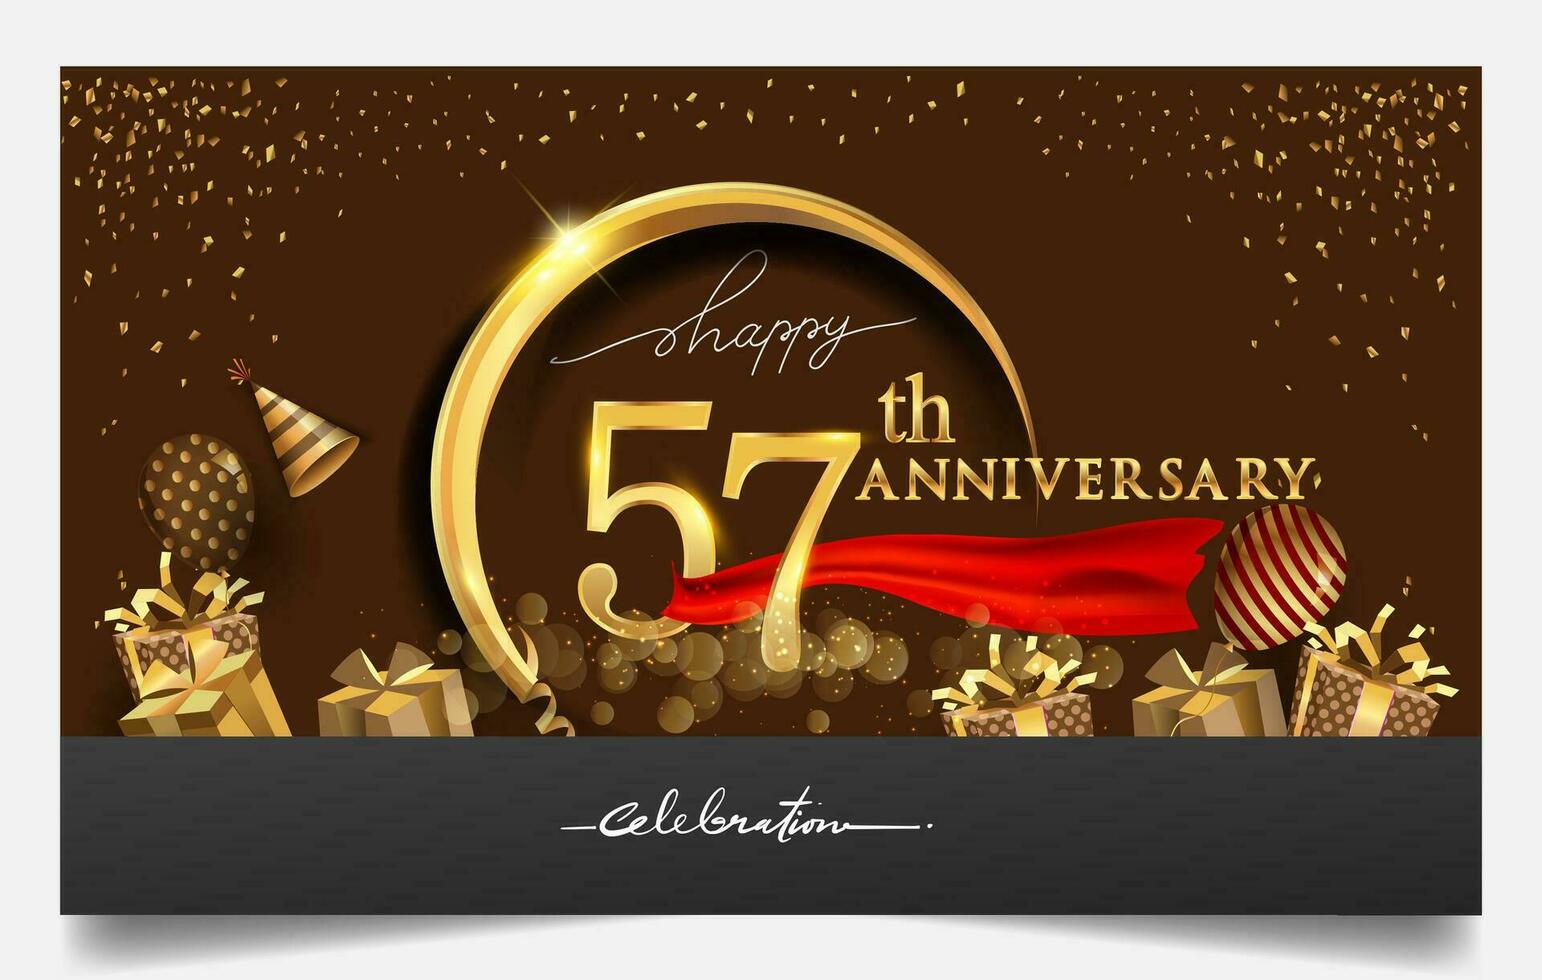 50th years anniversary design for greeting cards and invitation, with balloon, confetti and gift box, elegant design with gold and dark color, design template for birthday celebration. vector